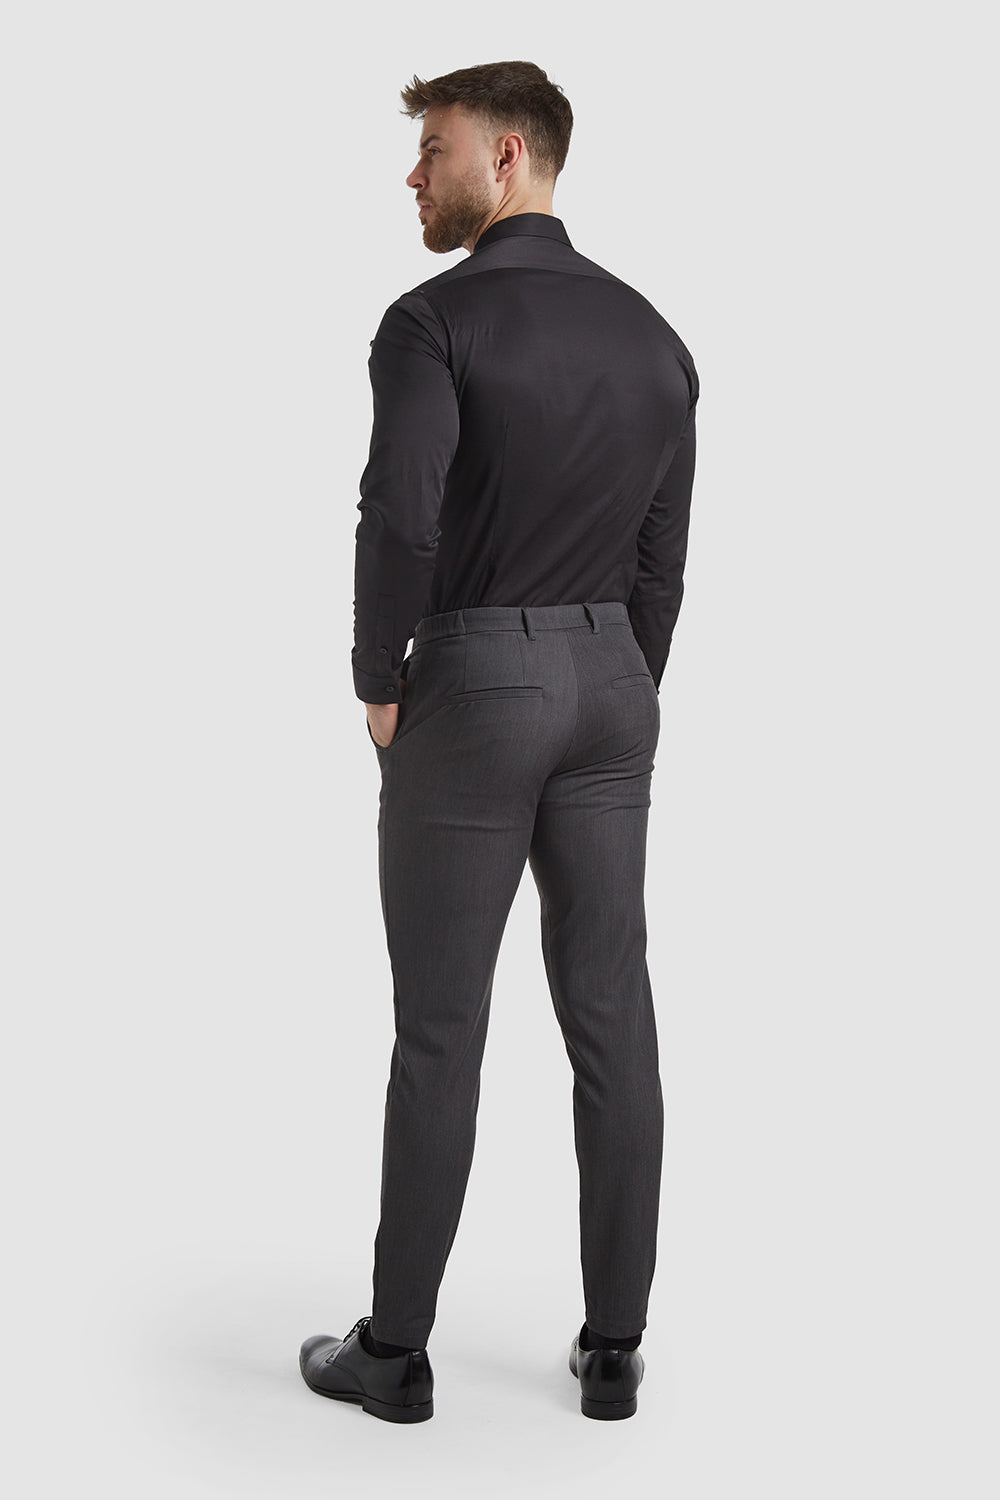 Athletic Fit Pants - Tailored Athlete - TAILORED ATHLETE - USA